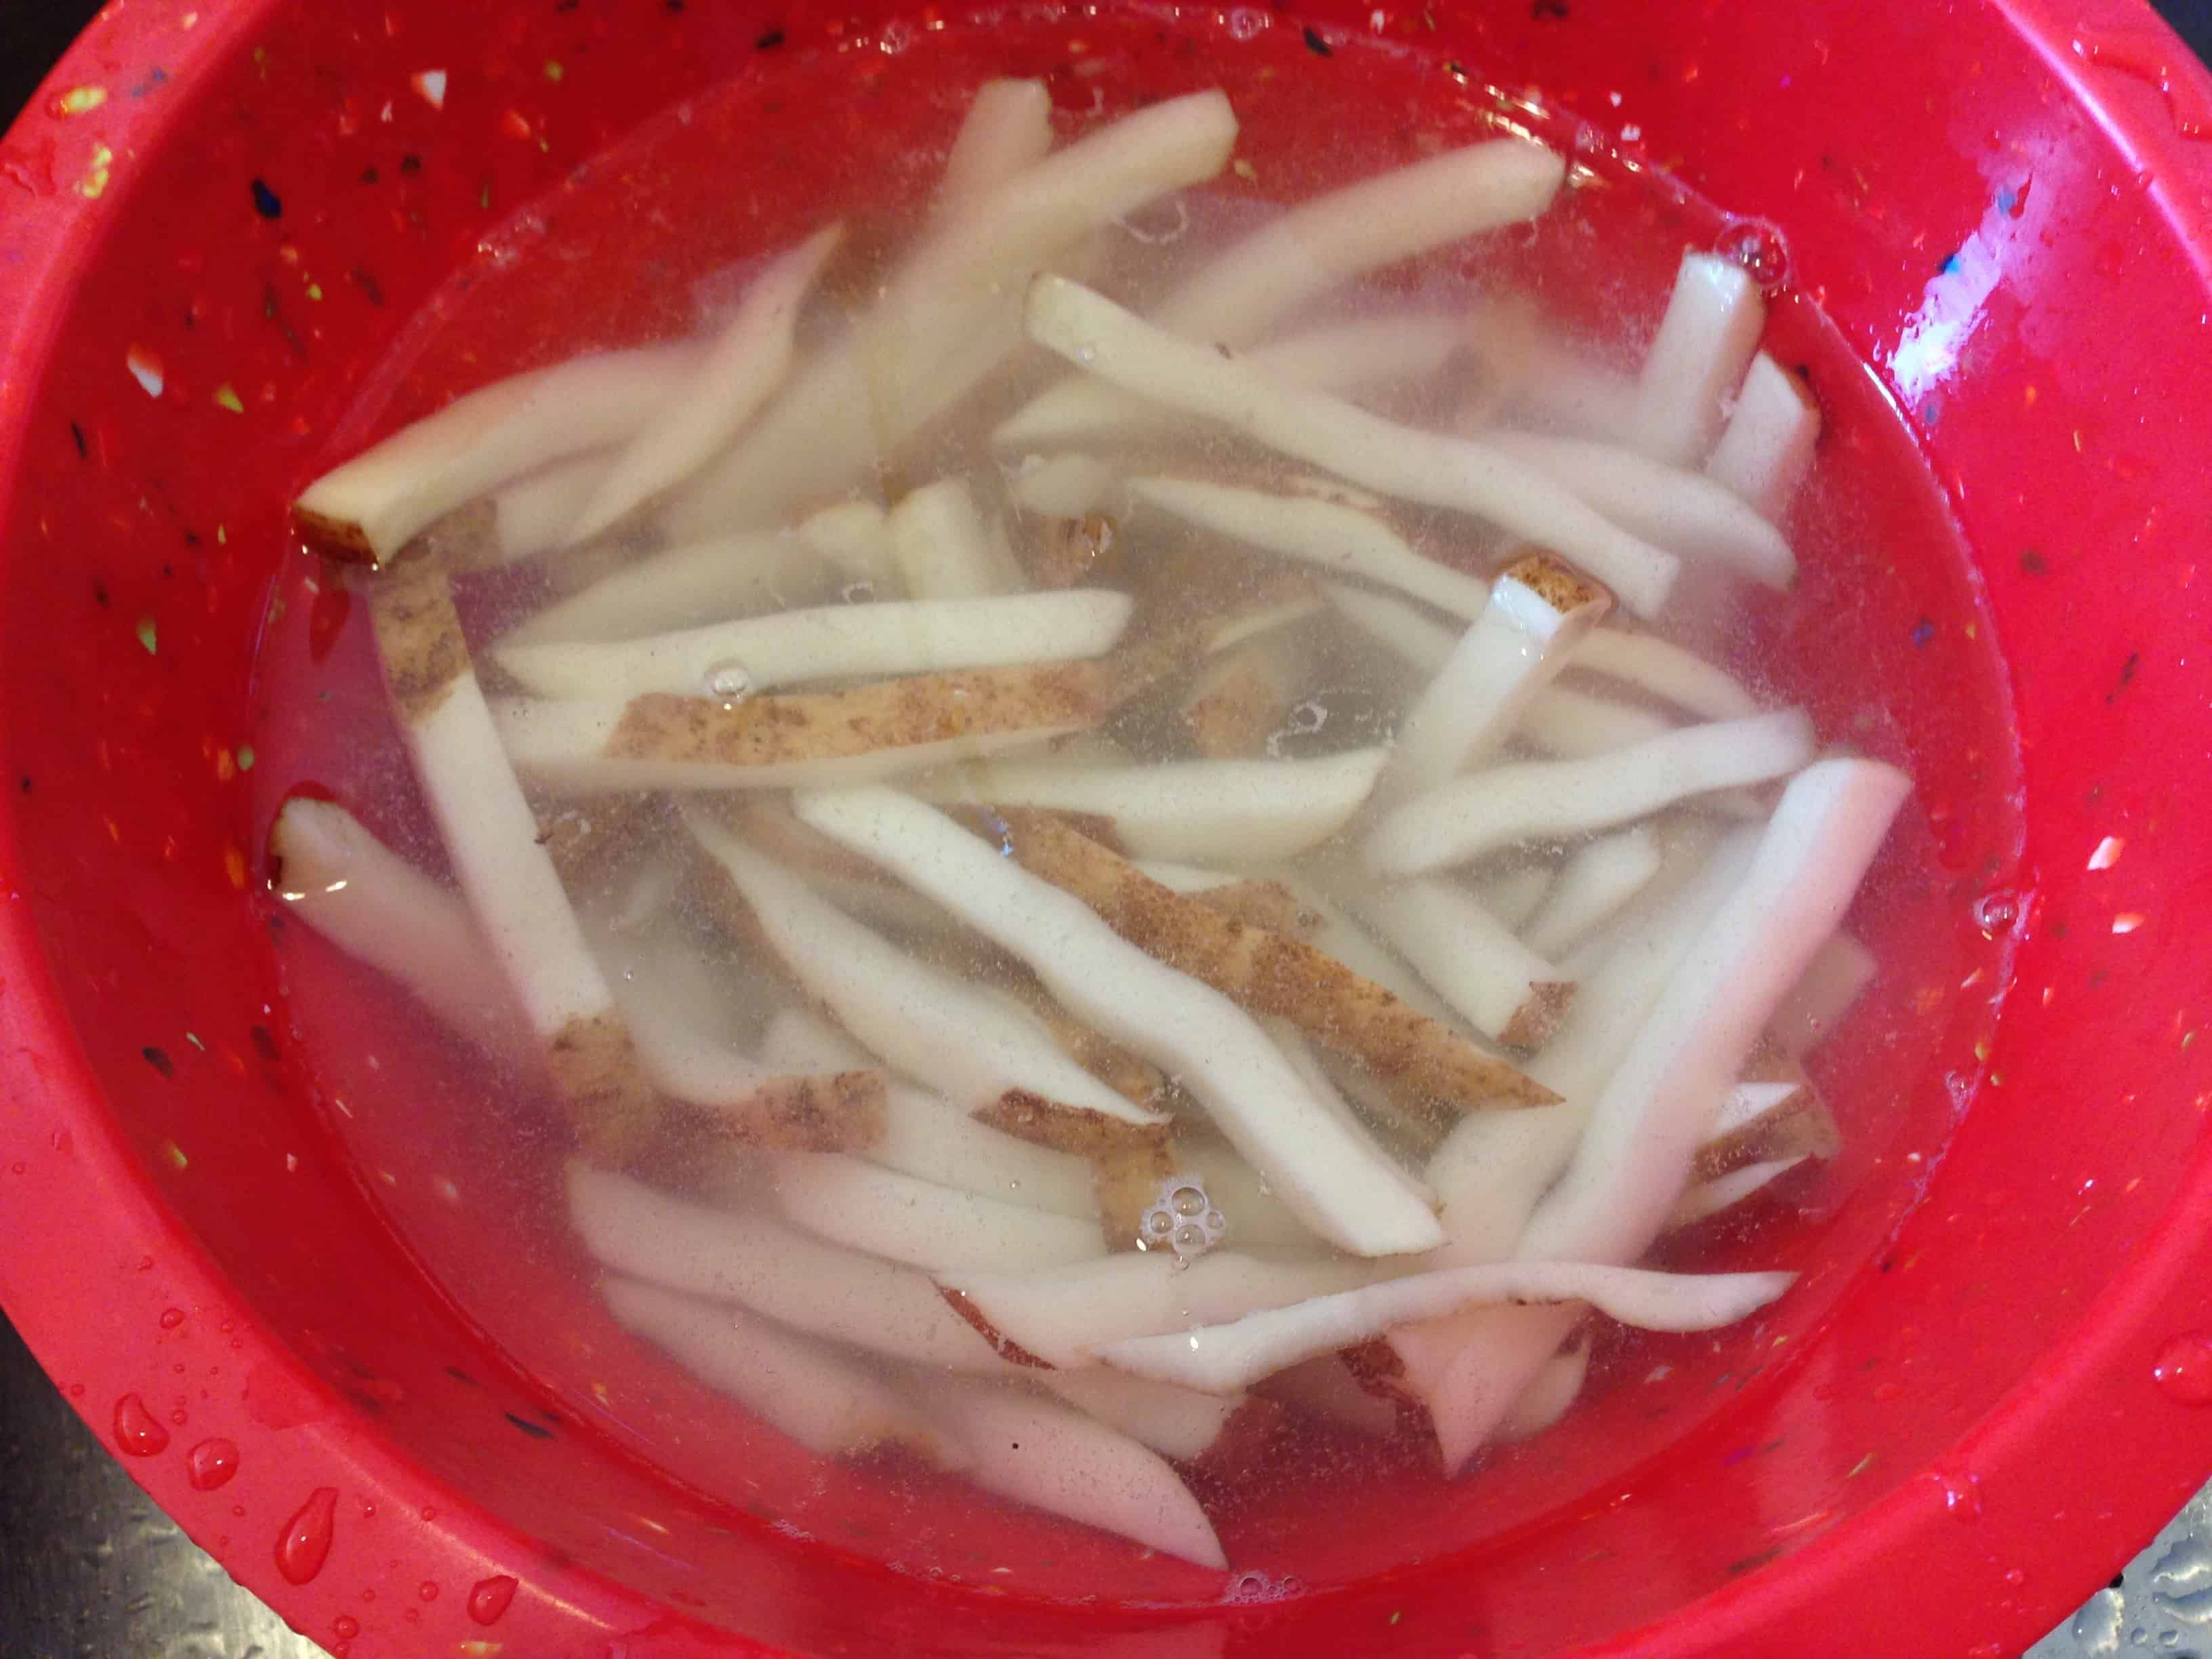 The fries soaking in water to remove starch